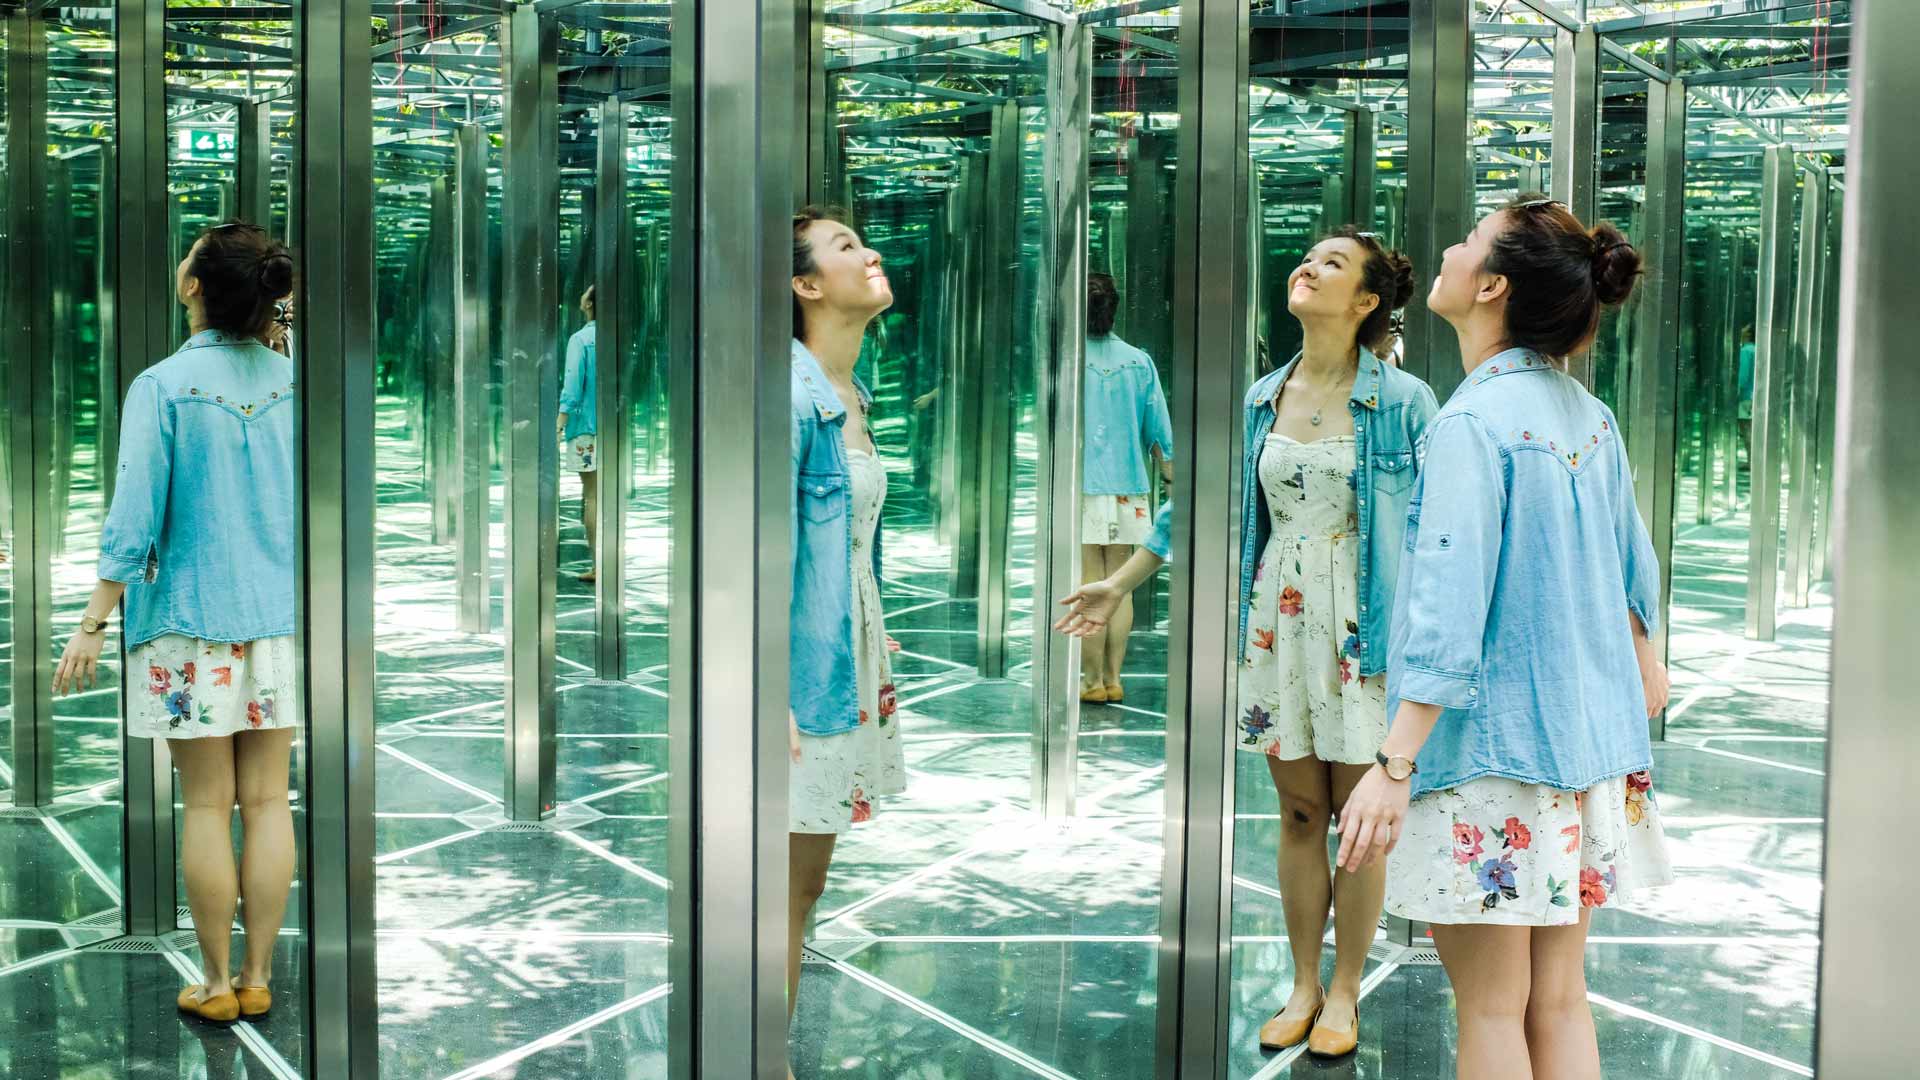 A 500-Square-Metre Mirror and Hedge Maze Has Just Opened Inside Singapore's Changi Airport